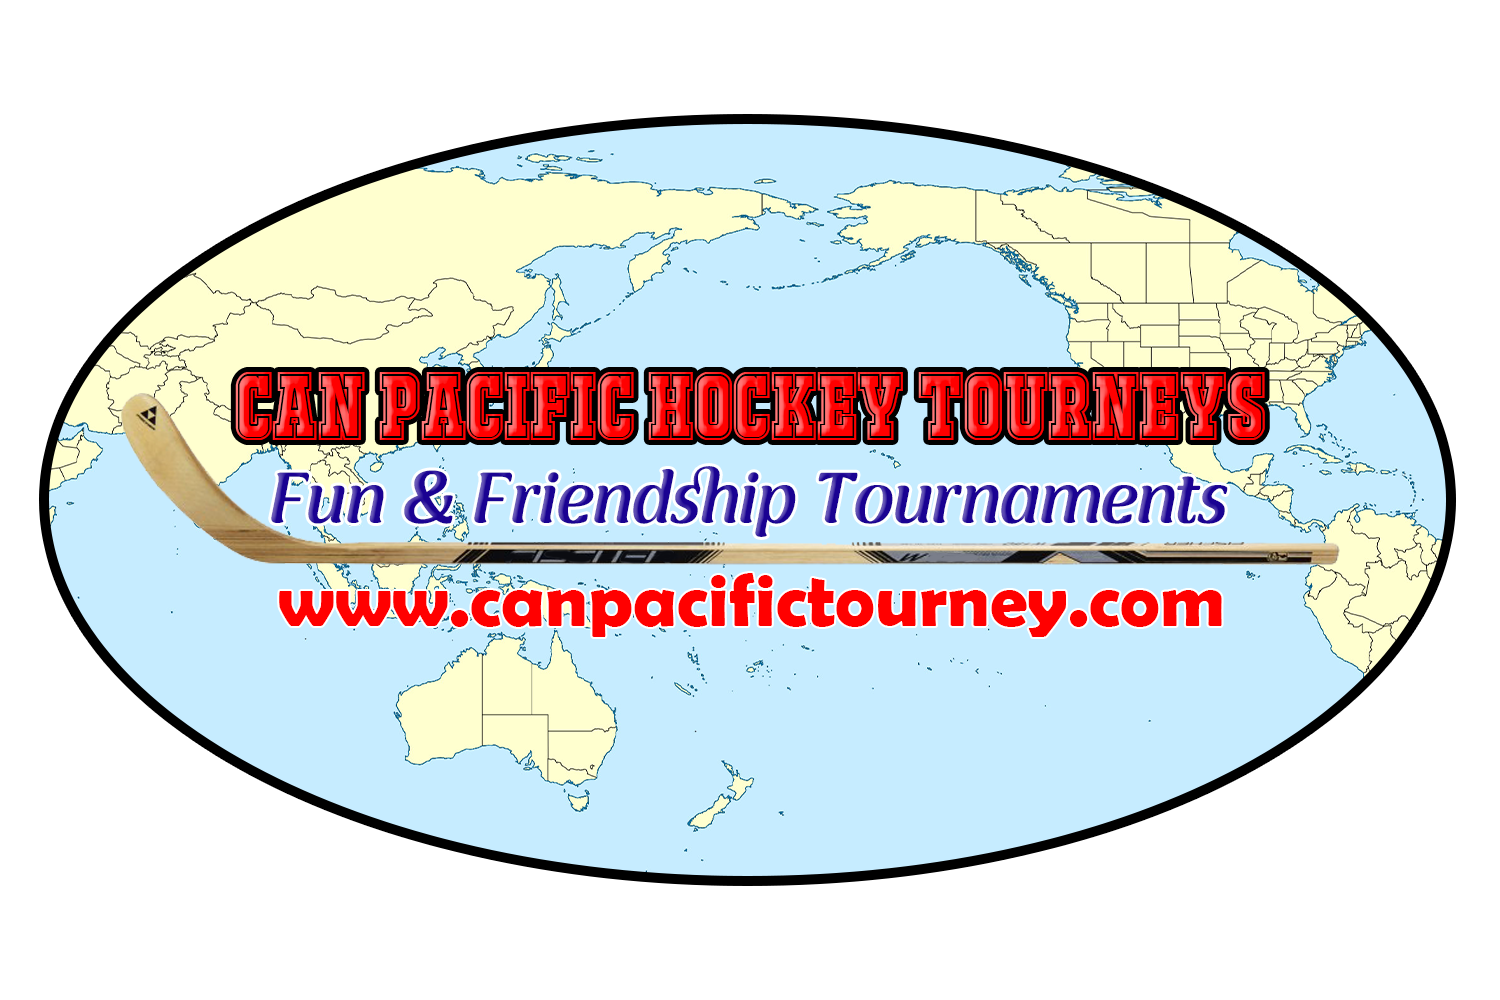 Can Pacific Hockey Tourney